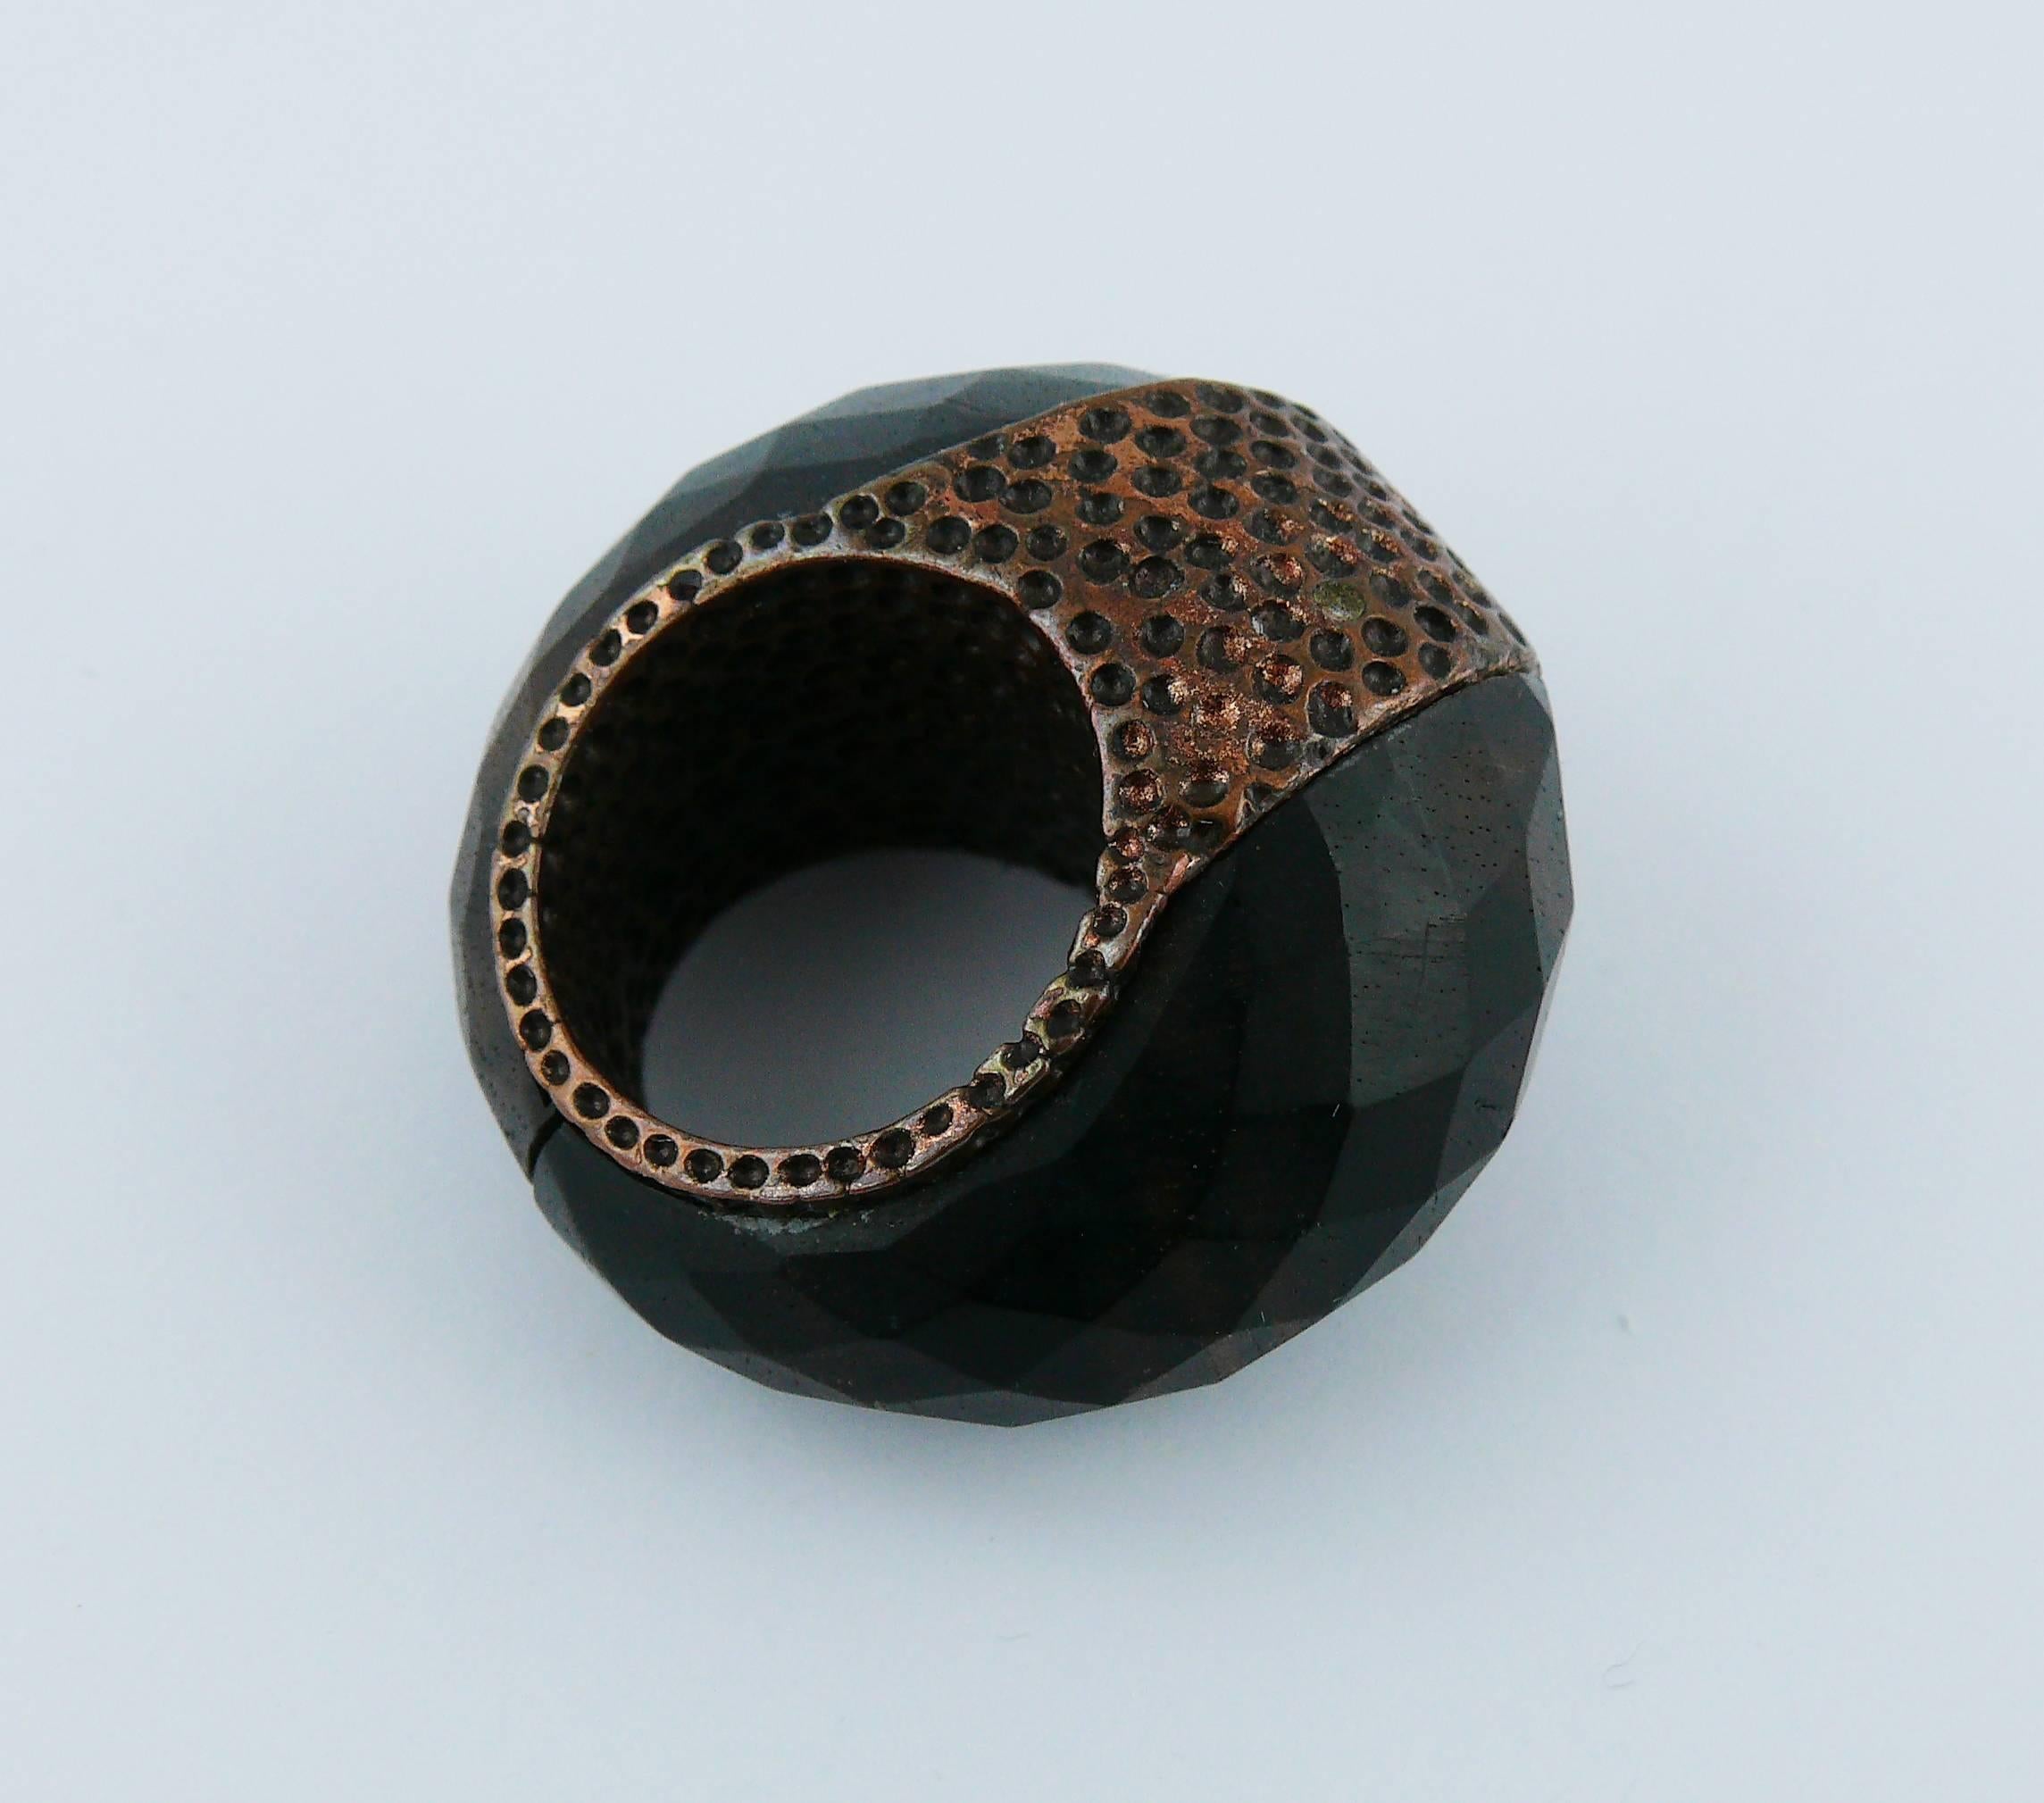 JEAN PAUL GAULTIER vintage chunky ring featuring faceted exotic wood sections in a textured copper toned setting.

Embossed JEAN PAUL GAULTIER.

Indicative measurements : inner circumference approx. 5.65 cm (2.22 inches) / total height approx. 3.5